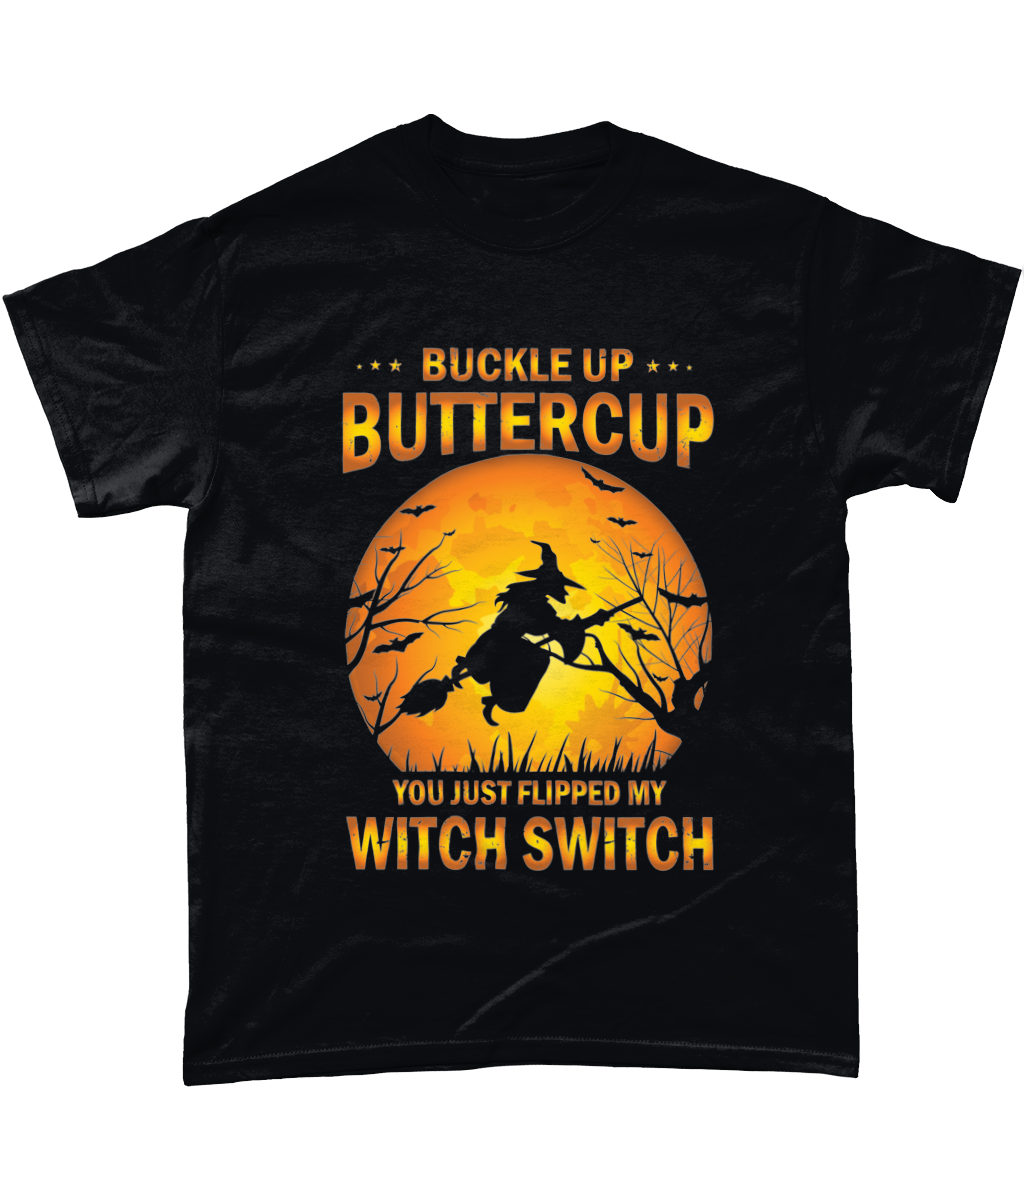 Buckle up buttercup you just flipped my witch switch t-shirt summer clothing